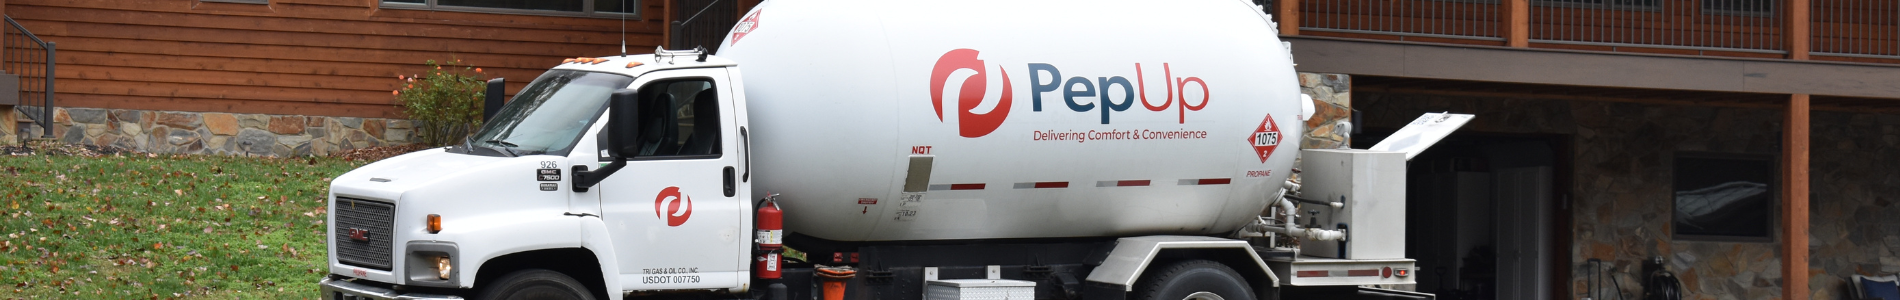 A PepUp propane delivery truck is parked in front of a home while the customer's propane tanks are filled.